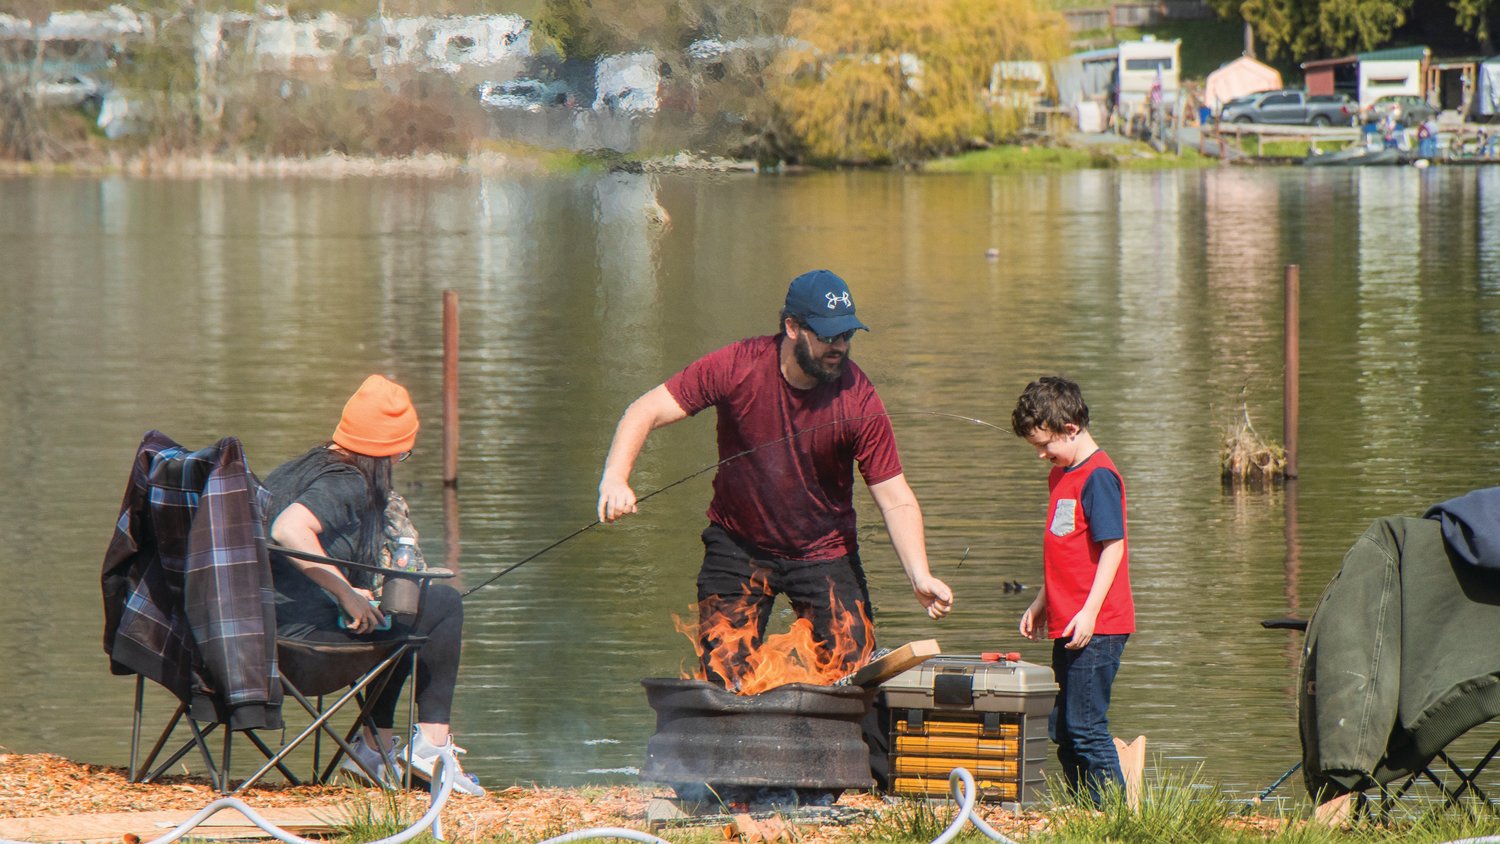 A family camps and fishes near a fire at the Lions Den Campground in Mineral.